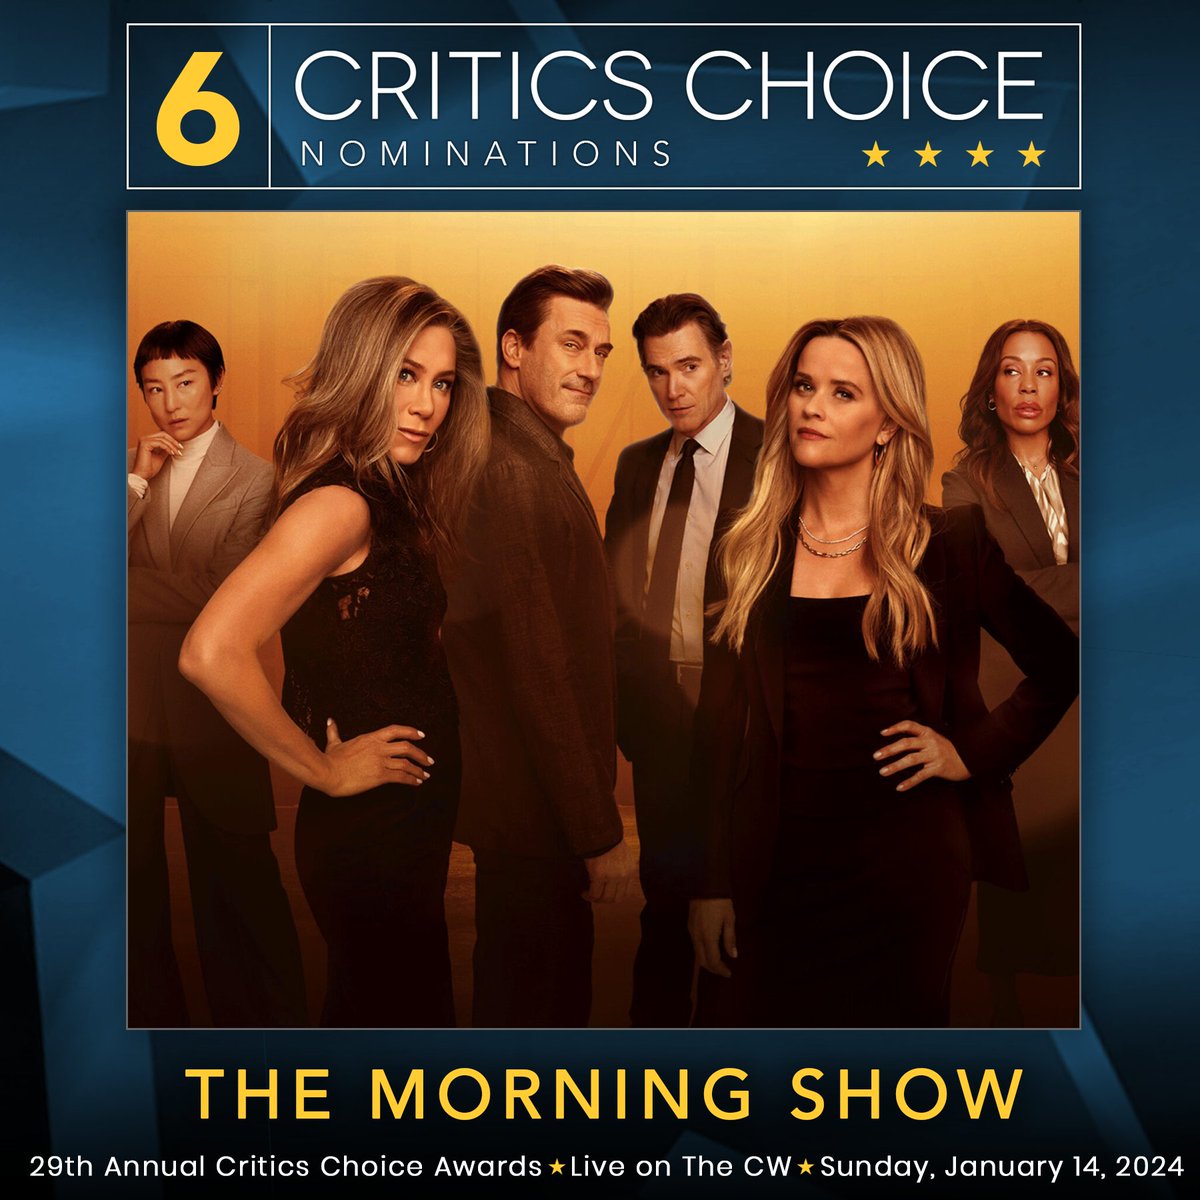 'The Morning Show' leads with six nominations among the contenders for the 29th Annual Critics Choice Awards. @TheMorningShow @AppleTV #TheMorningShow #CriticsChoiceAwards #CriticsChoice